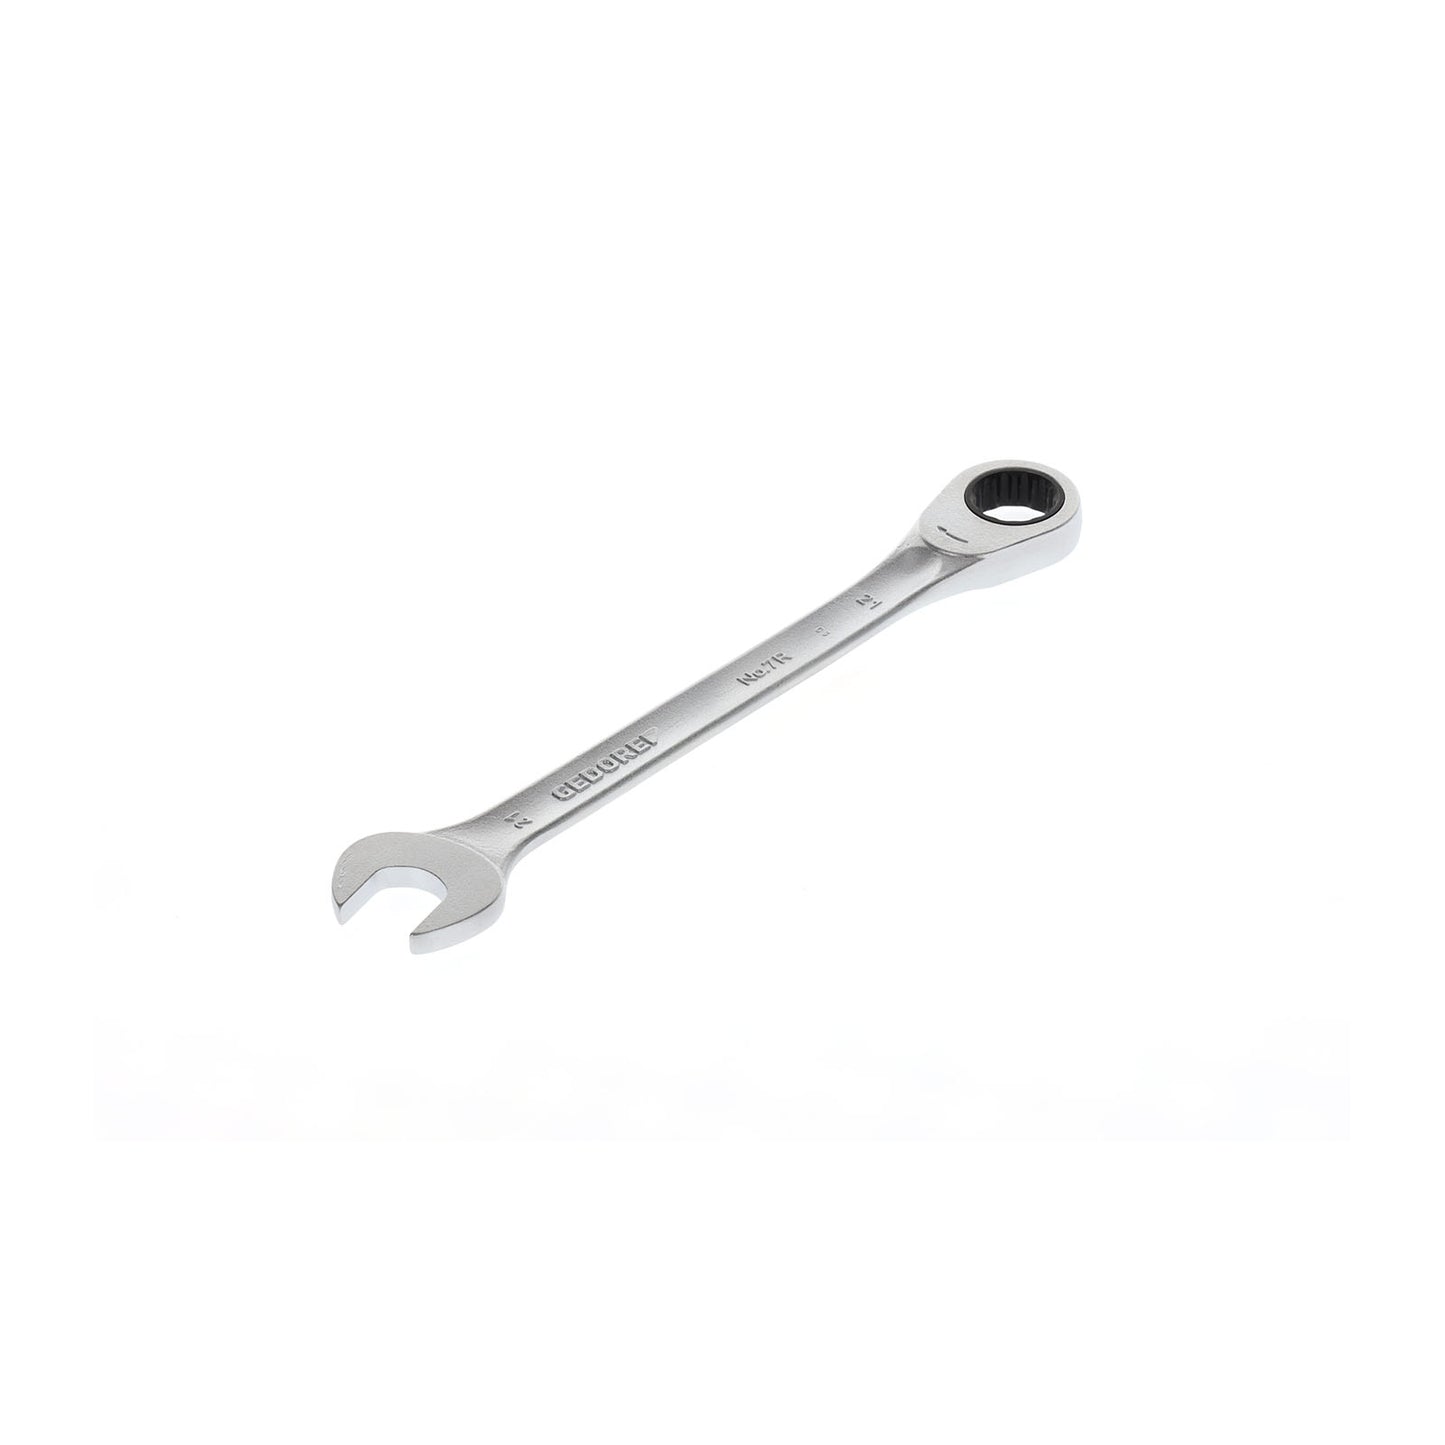 GEDORE 7 R 21 - Ratchet combination wrench, 21mm (2219433)